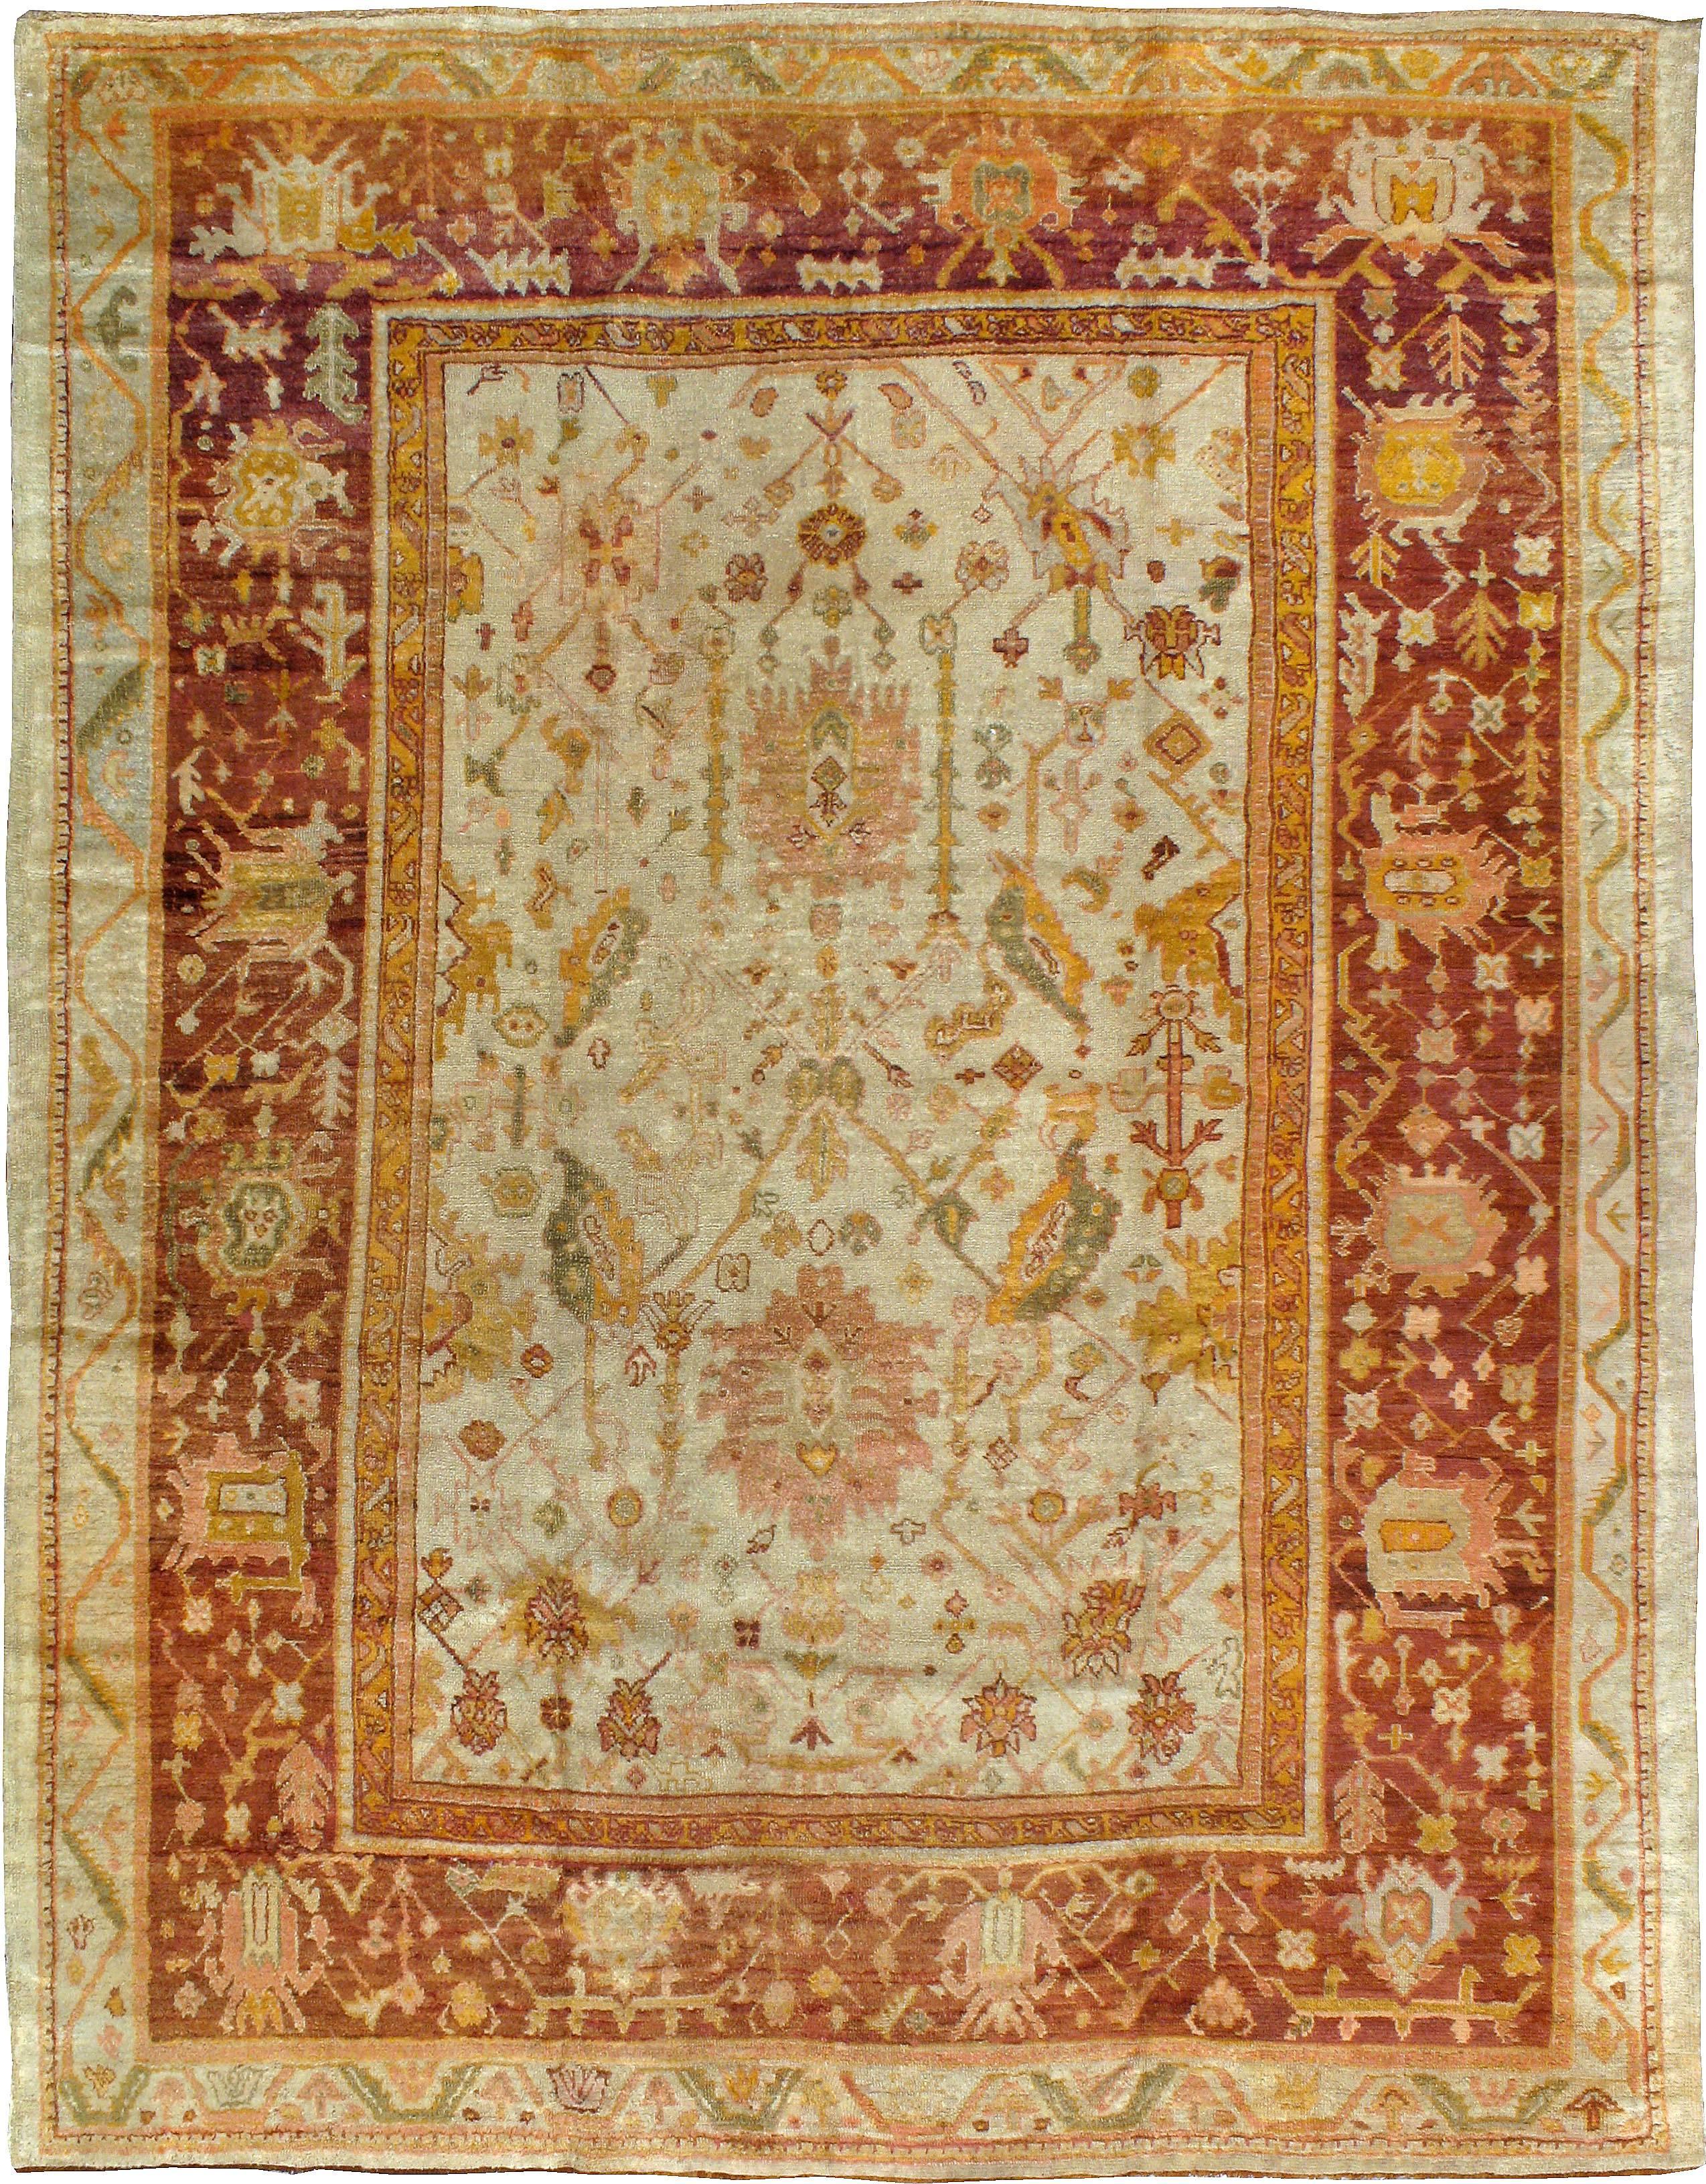 An antique Turkish Oushak carpet from the turn of the 20th century. It's revering life has sublimely given it a vintage look and patina.